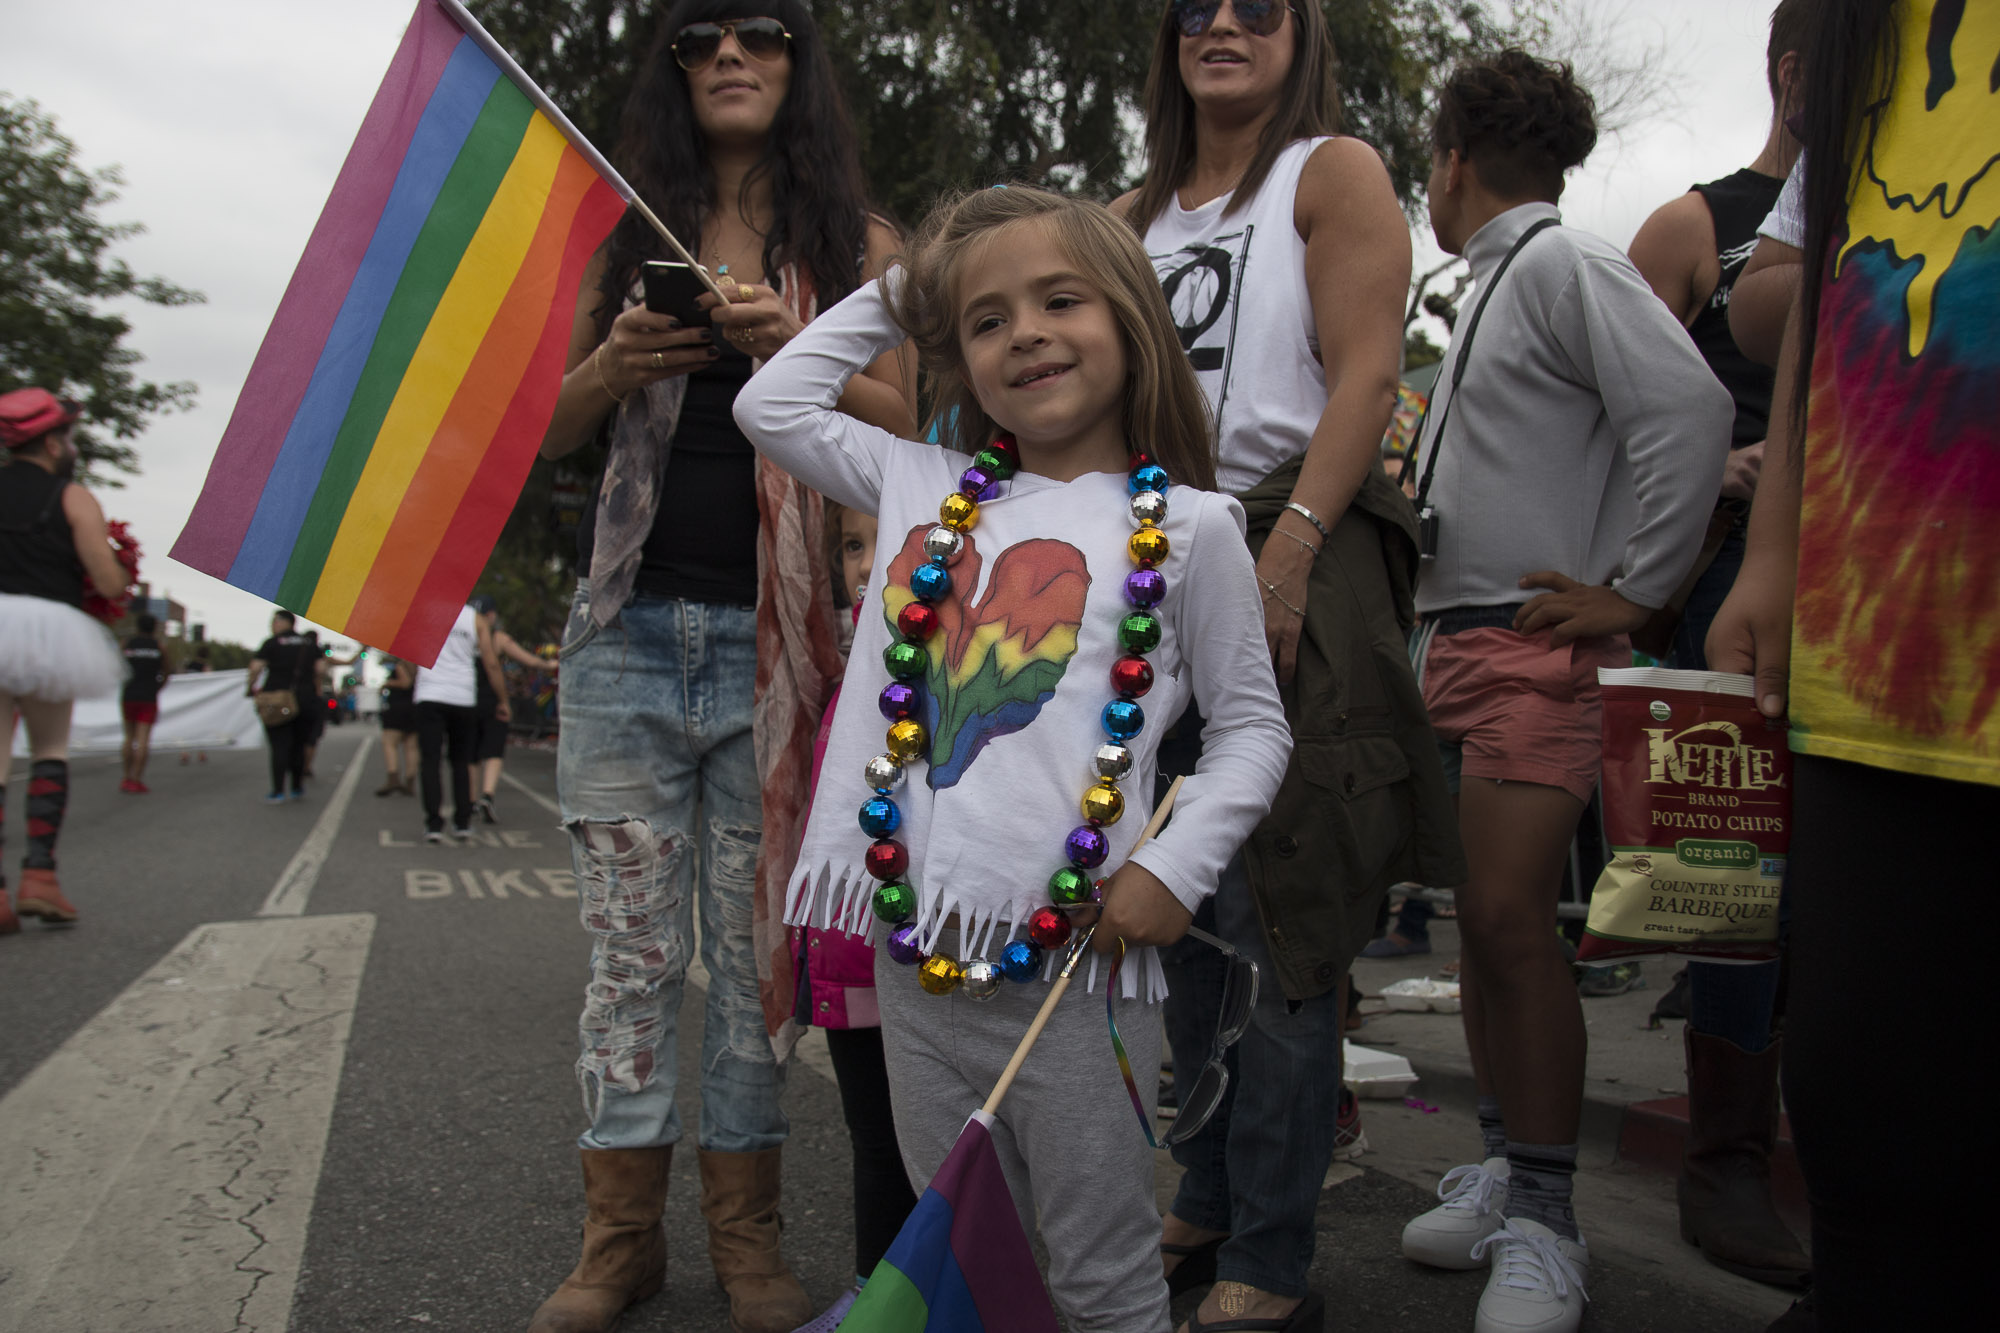 Cute and proud at LA Pride. (Photo by Derek Wear of Unikorn Photography)